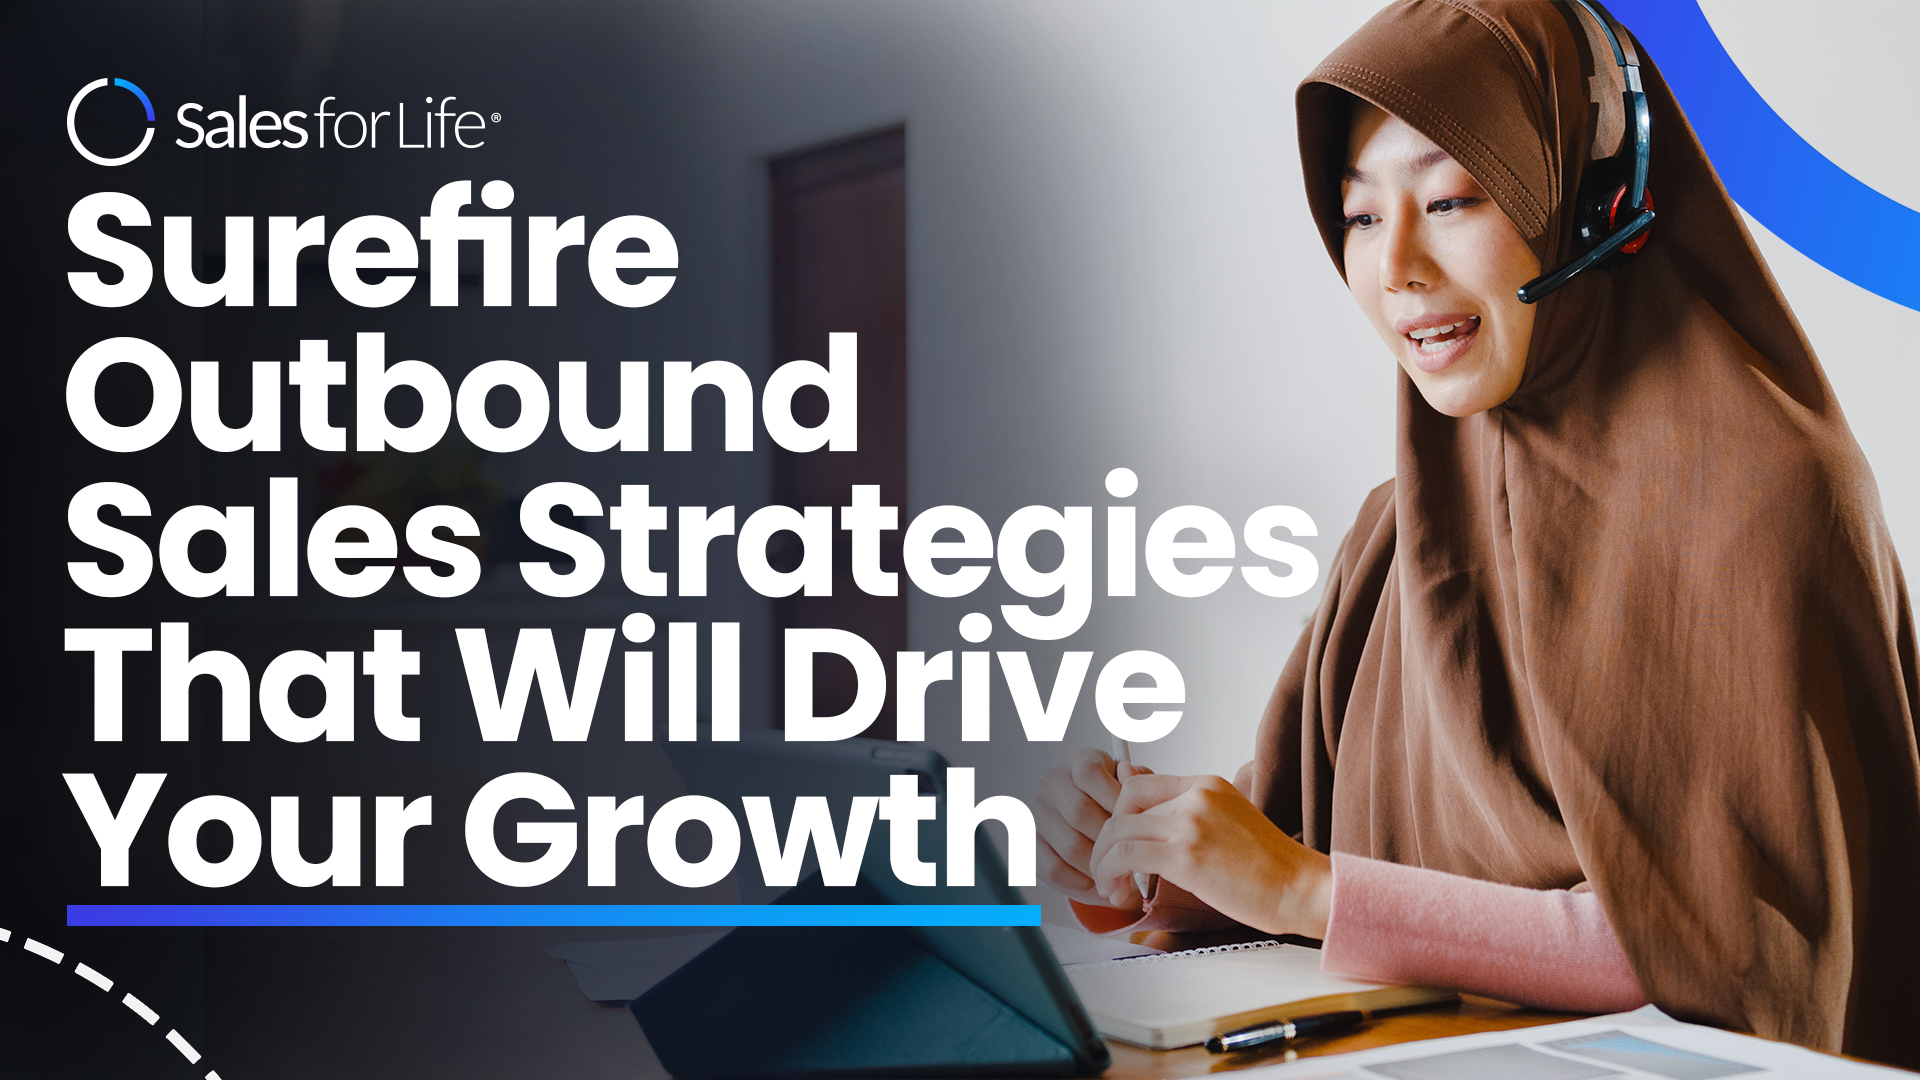 Surefire Outbound Sales Strategies That Will Drive Your Growth